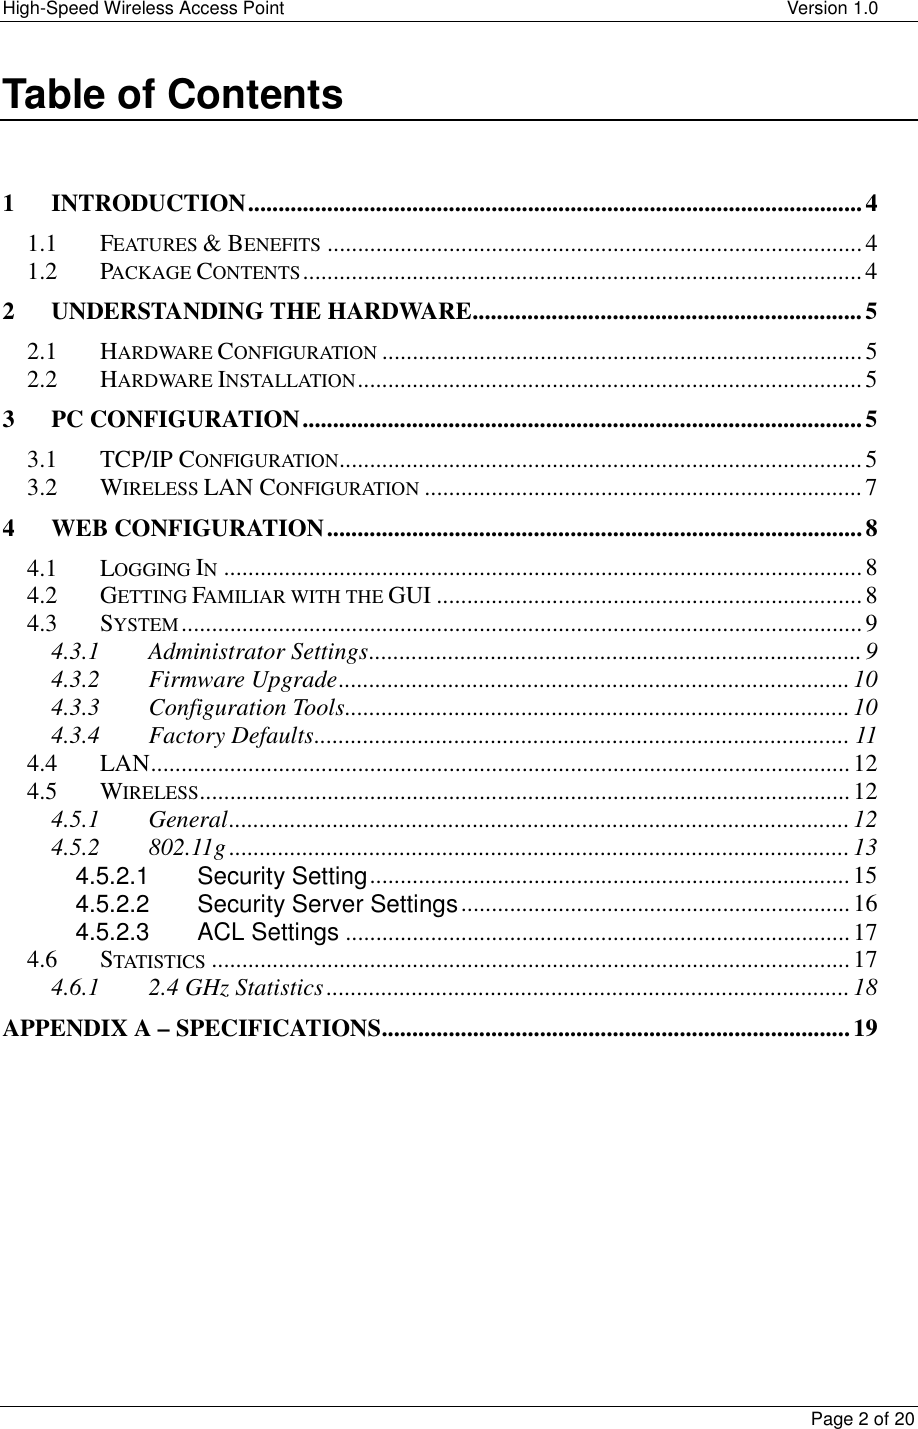 High-Speed Wireless Access Point    Version 1.0  Page 2 of 20  Table of Contents   1 INTRODUCTION.....................................................................................................4 1.1 FEATURES &amp; BENEFITS ........................................................................................4 1.2 PACKAGE CONTENTS............................................................................................4 2 UNDERSTANDING THE HARDWARE................................................................5 2.1 HARDWARE CONFIGURATION ...............................................................................5 2.2 HARDWARE INSTALLATION...................................................................................5 3 PC CONFIGURATION............................................................................................5 3.1 TCP/IP CONFIGURATION......................................................................................5 3.2 WIRELESS LAN CONFIGURATION ........................................................................7 4 WEB CONFIGURATION........................................................................................8 4.1 LOGGING IN.........................................................................................................8 4.2 GETTING FAMILIAR WITH THE GUI ......................................................................8 4.3 SYSTEM................................................................................................................9 4.3.1 Administrator Settings................................................................................. 9 4.3.2 Firmware Upgrade.................................................................................... 10 4.3.3 Configuration Tools................................................................................... 10 4.3.4 Factory Defaults........................................................................................ 11 4.4 LAN...................................................................................................................12 4.5 WIRELESS...........................................................................................................12 4.5.1 General......................................................................................................12 4.5.2 802.11g ......................................................................................................13 4.5.2.1 Security Setting...............................................................................15 4.5.2.2 Security Server Settings................................................................16 4.5.2.3 ACL Settings ...................................................................................17 4.6 STATISTICS .........................................................................................................17 4.6.1 2.4 GHz Statistics ......................................................................................18 APPENDIX A – SPECIFICATIONS.............................................................................19    